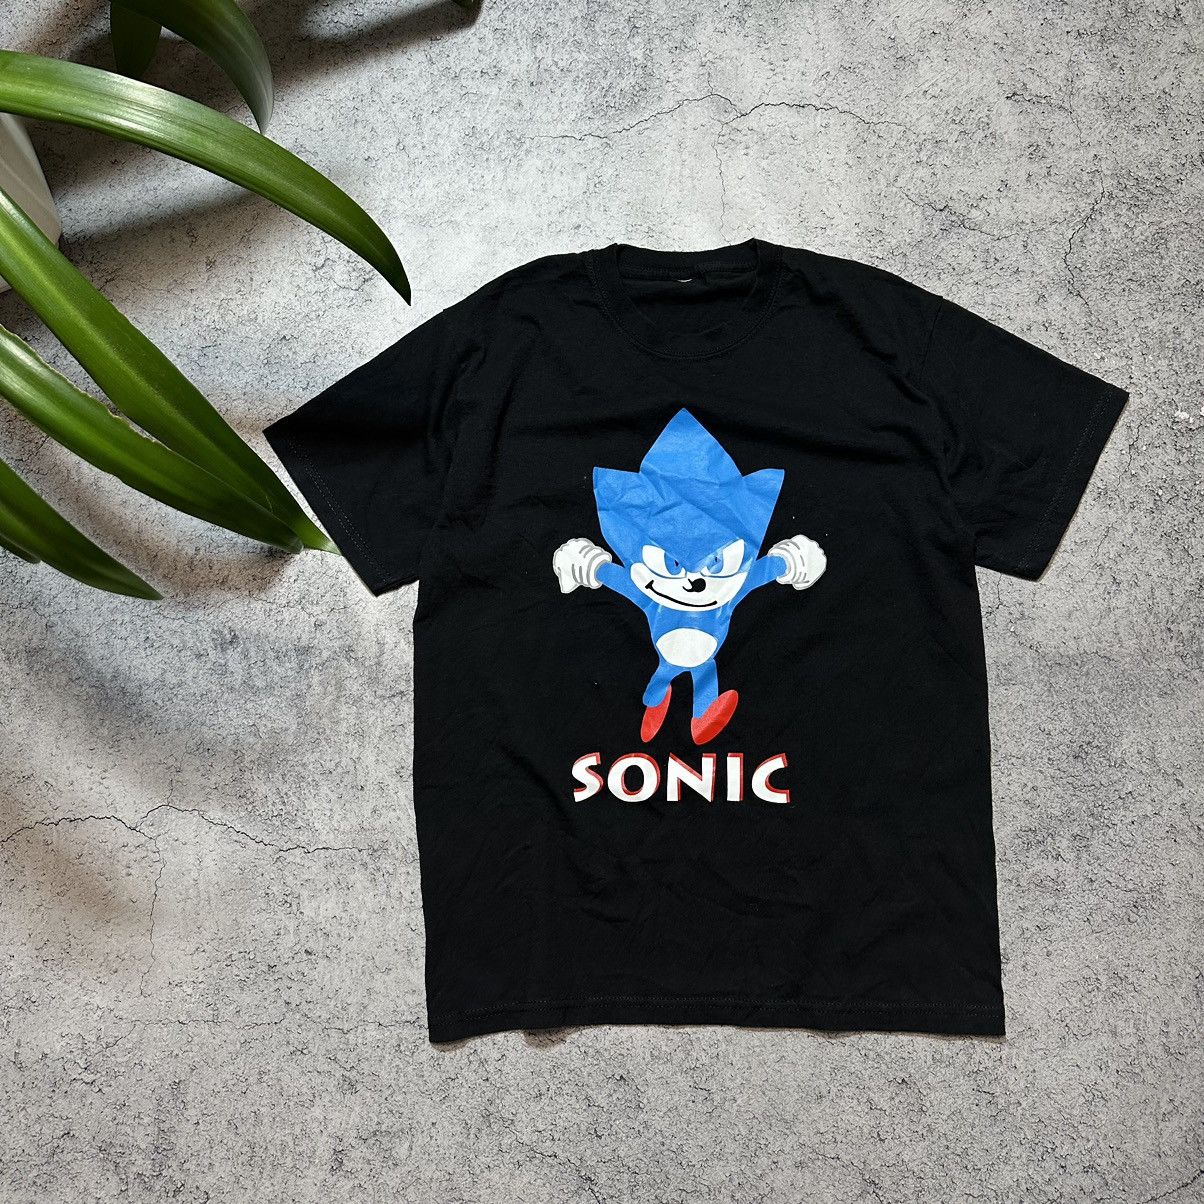 The Game Vintage 00's T-Shirt Sonik | Grailed